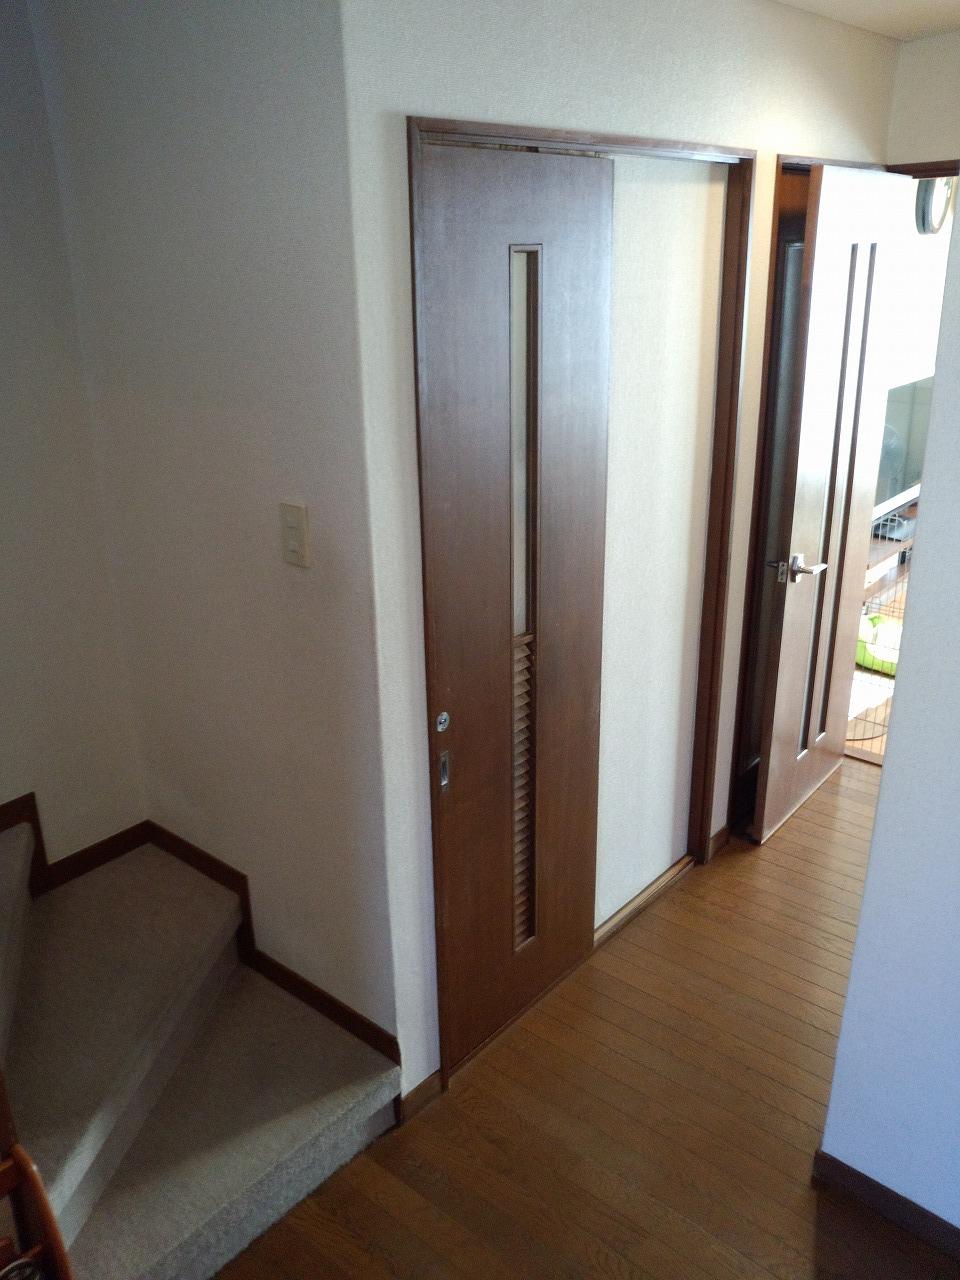 Entrance. Upon entering the front door, Stairs to the left hand, There is LDK in the back